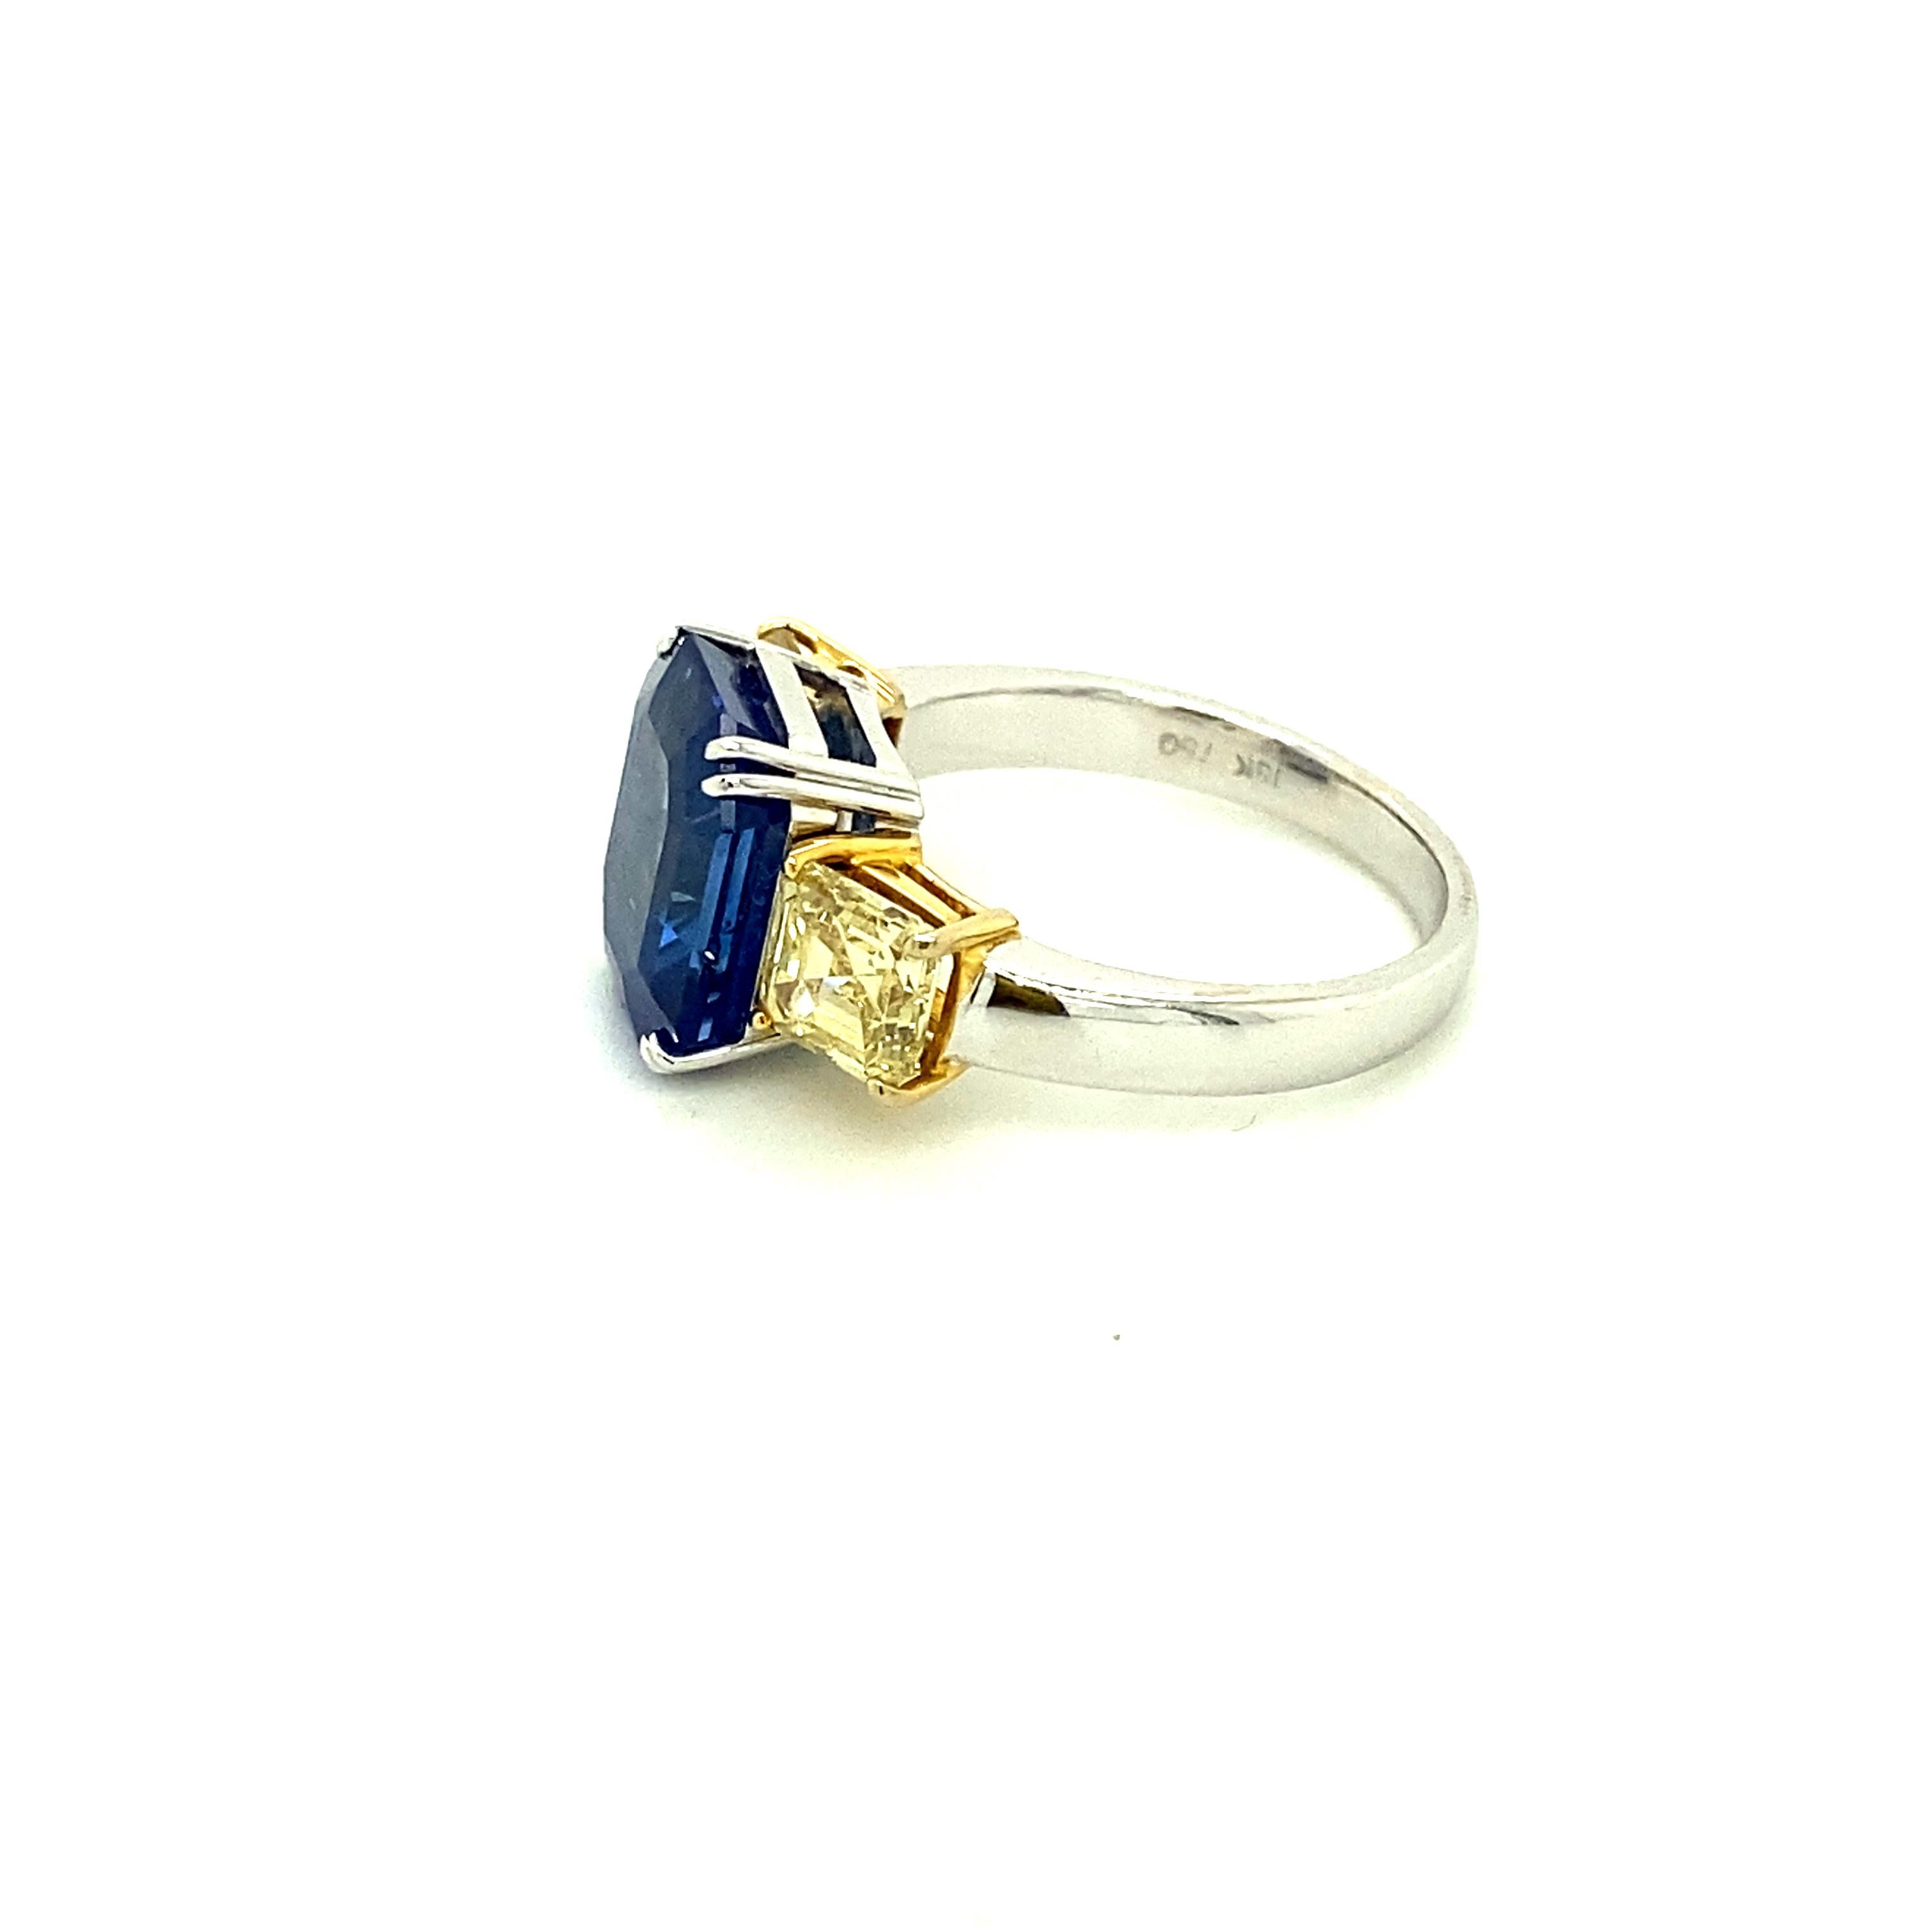 Radiant Cut 5.77 Carat GIA Certified Blue Sapphire and Fancy Yellow Diamonds Gold Ring